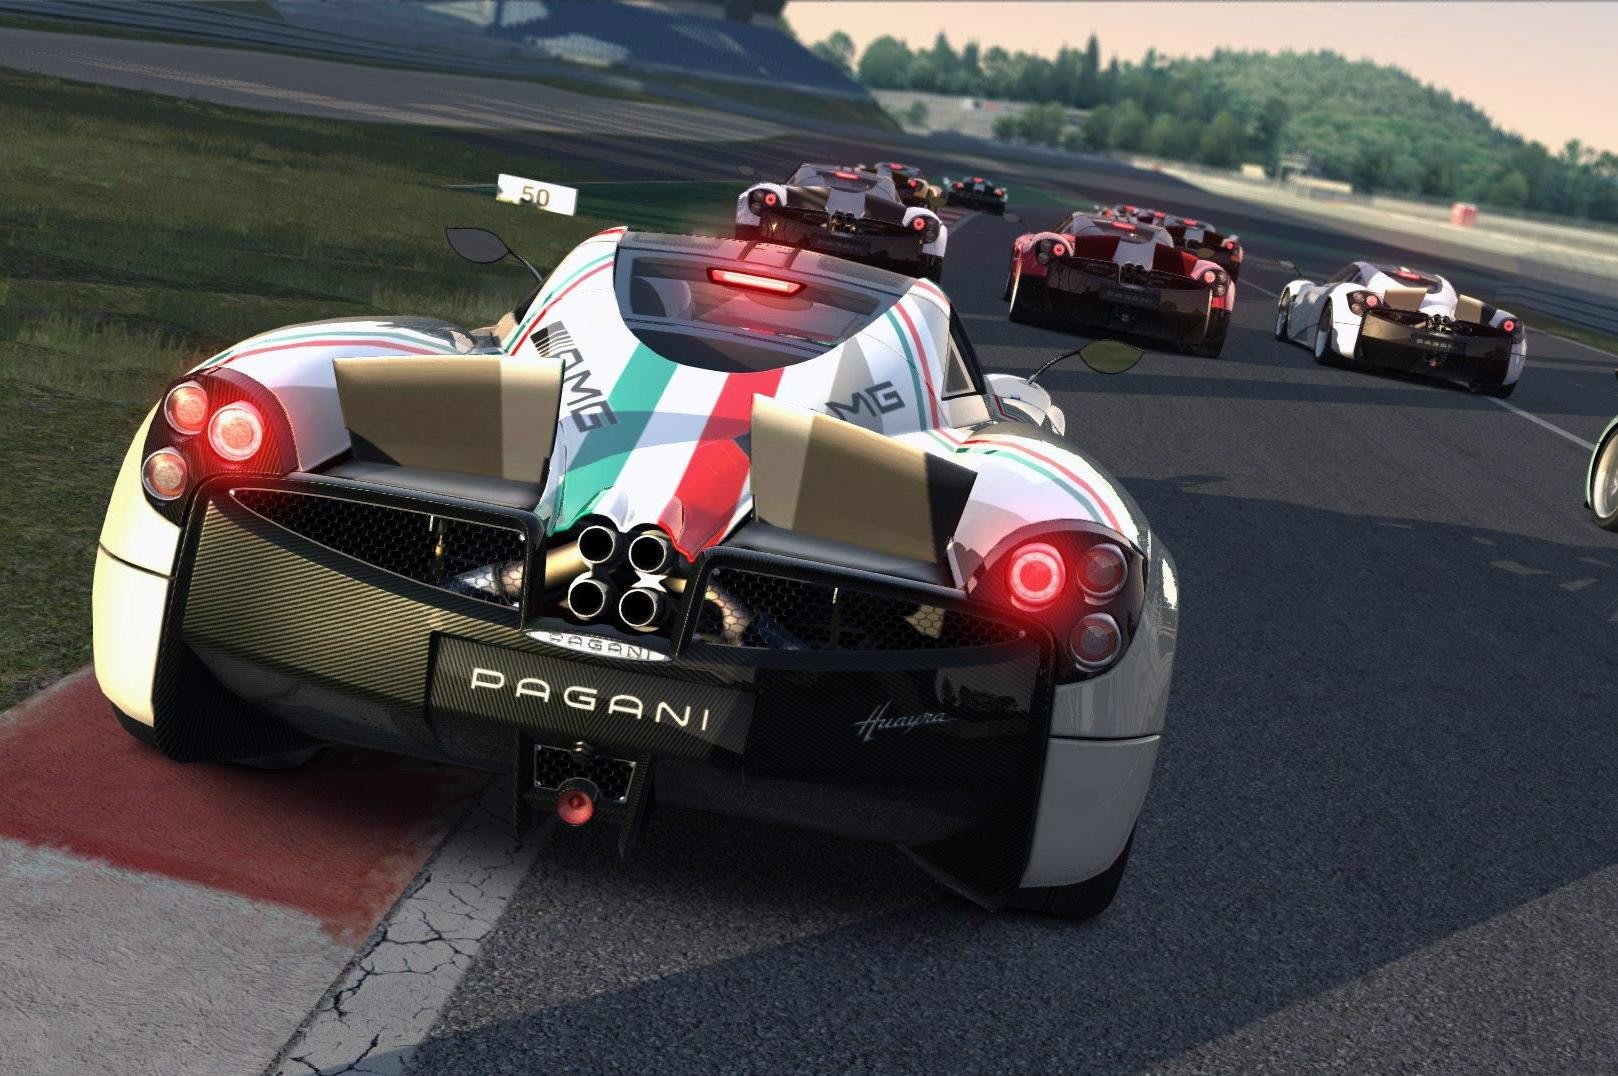 5 Things Assetto Corsa 2 Must Get Right